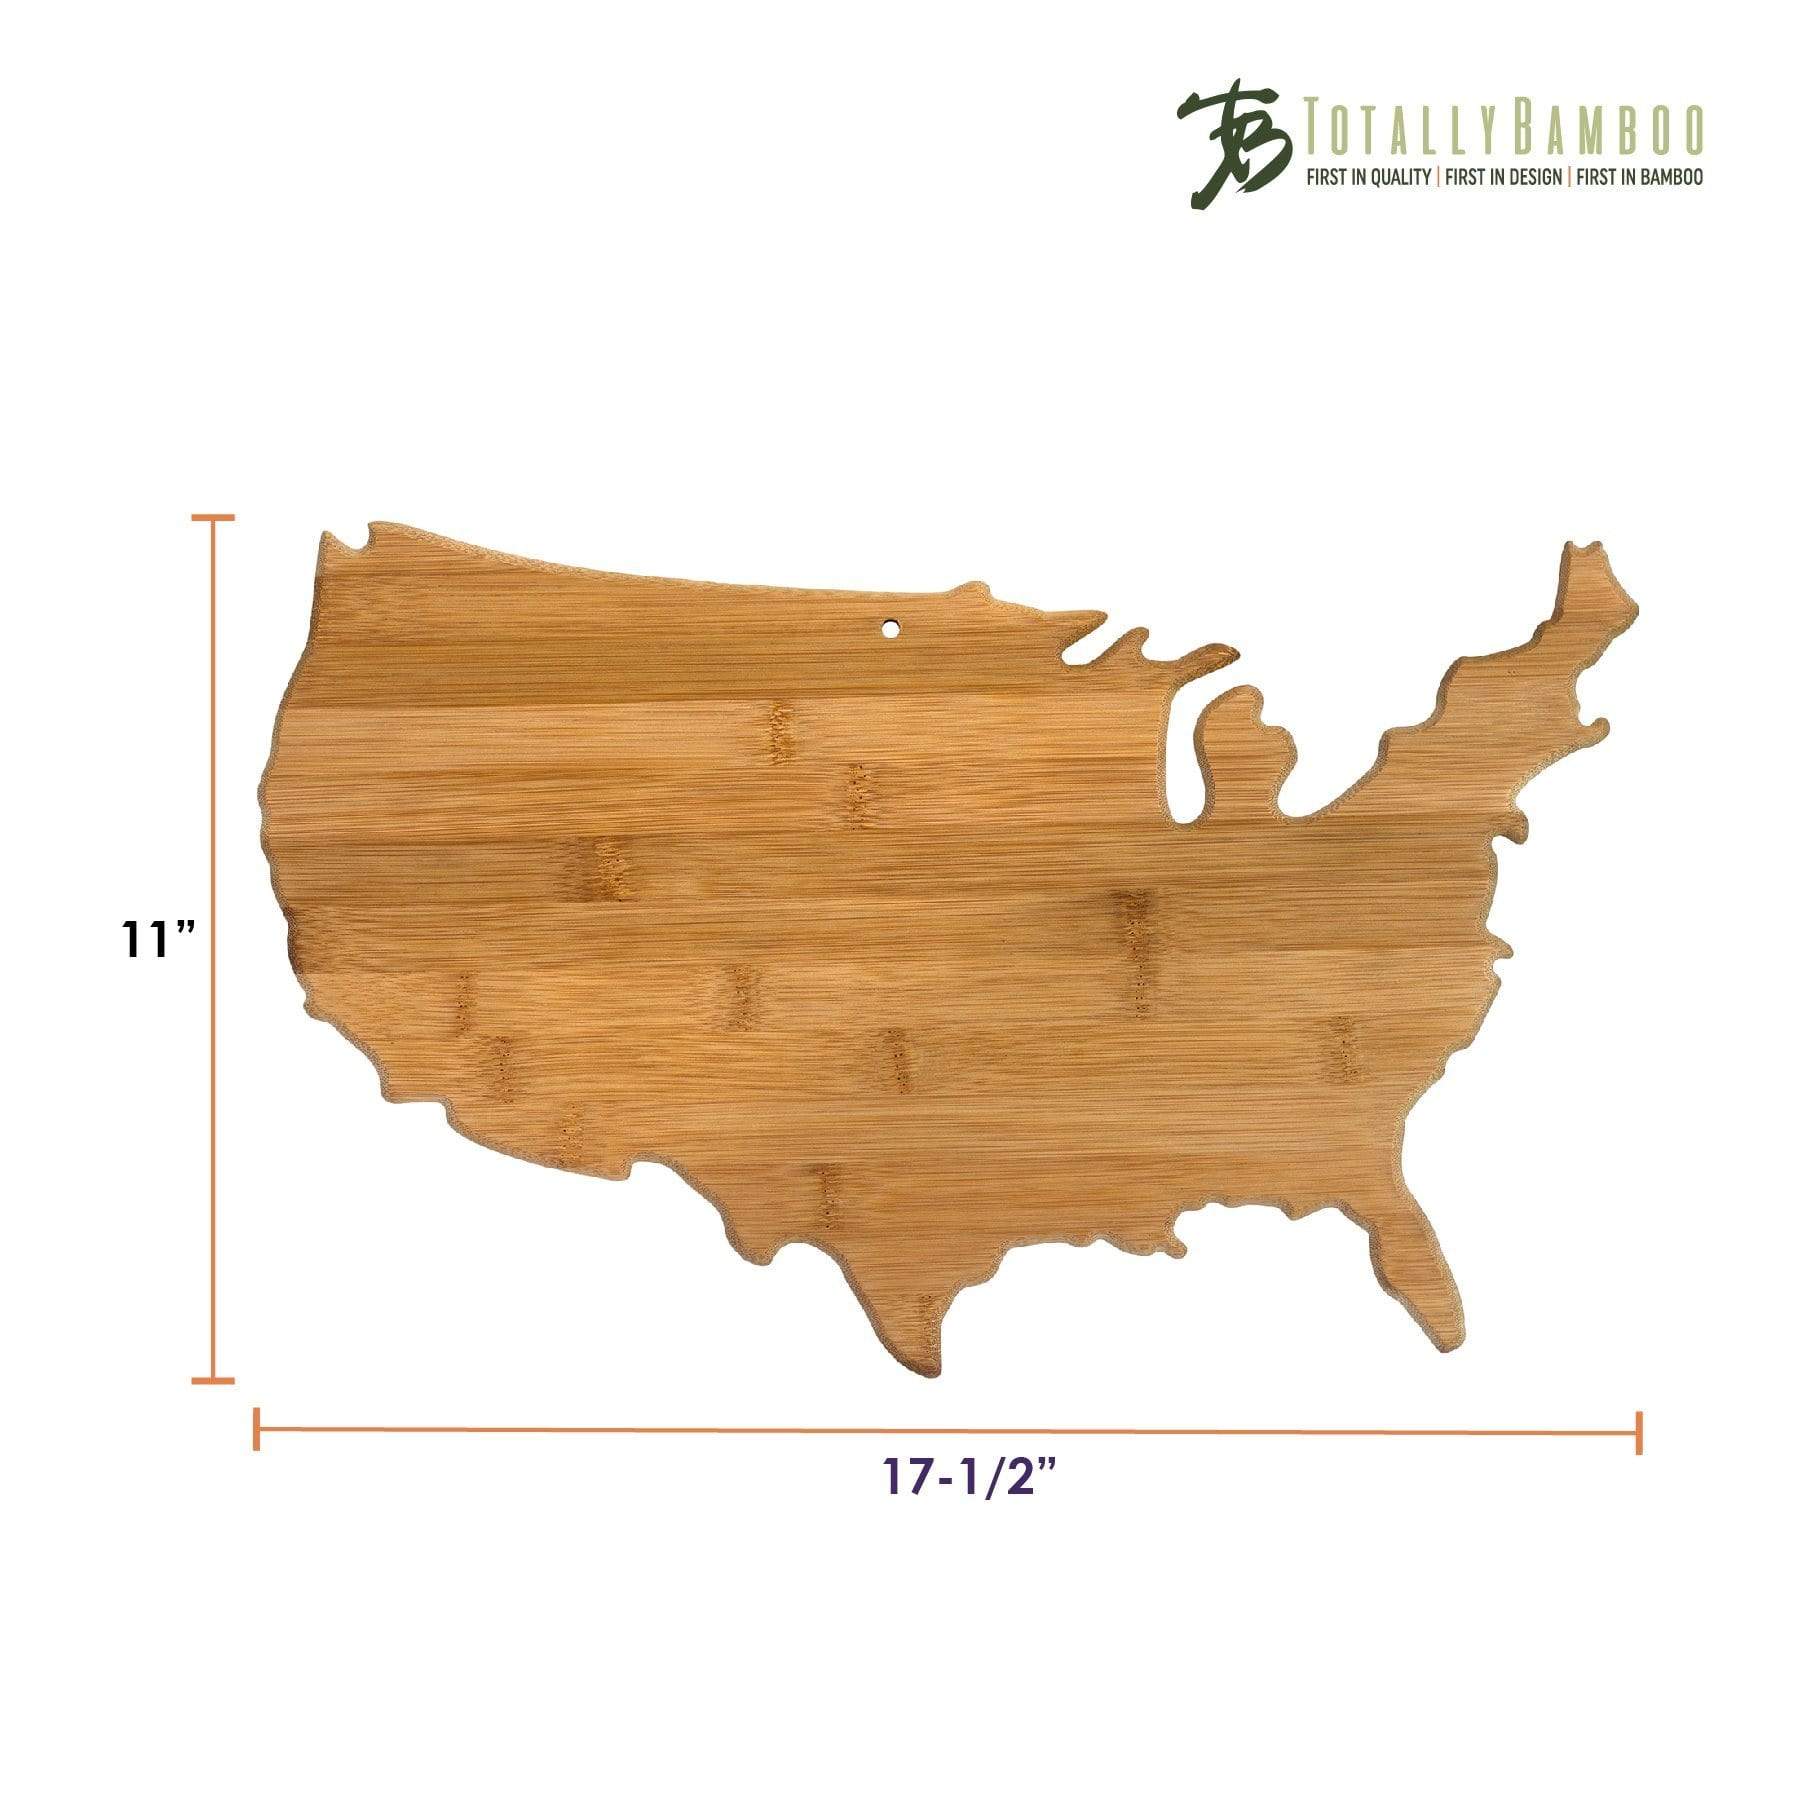 https://totallybamboo.com/cdn/shop/products/usa-shaped-bamboo-serving-and-cutting-board-totally-bamboo-306274.jpg?v=1628040675